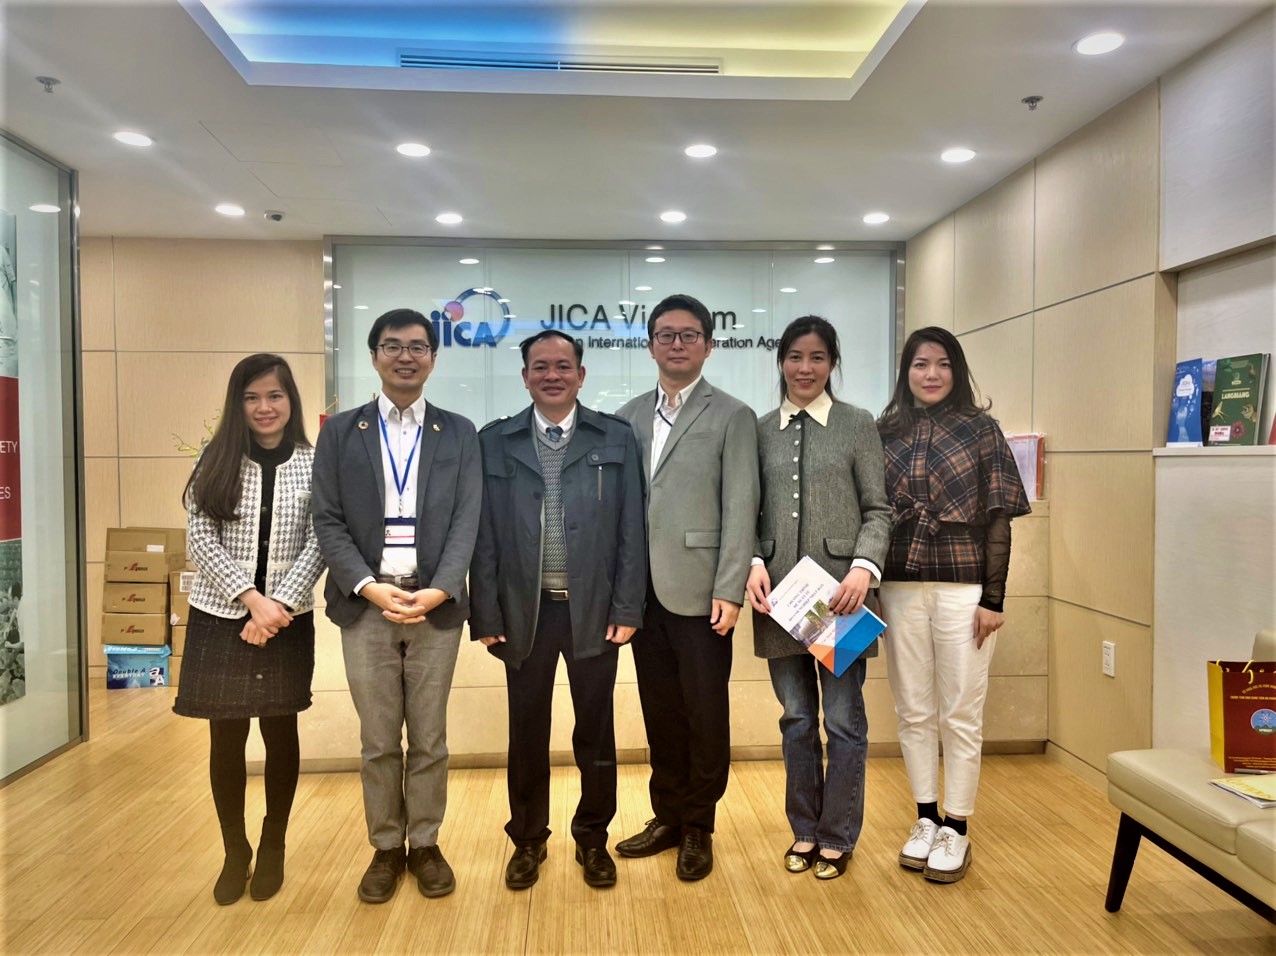 Vinh Phuc Department of Planning and Investment increasing to cooperate with Japanese promotion investment organizations